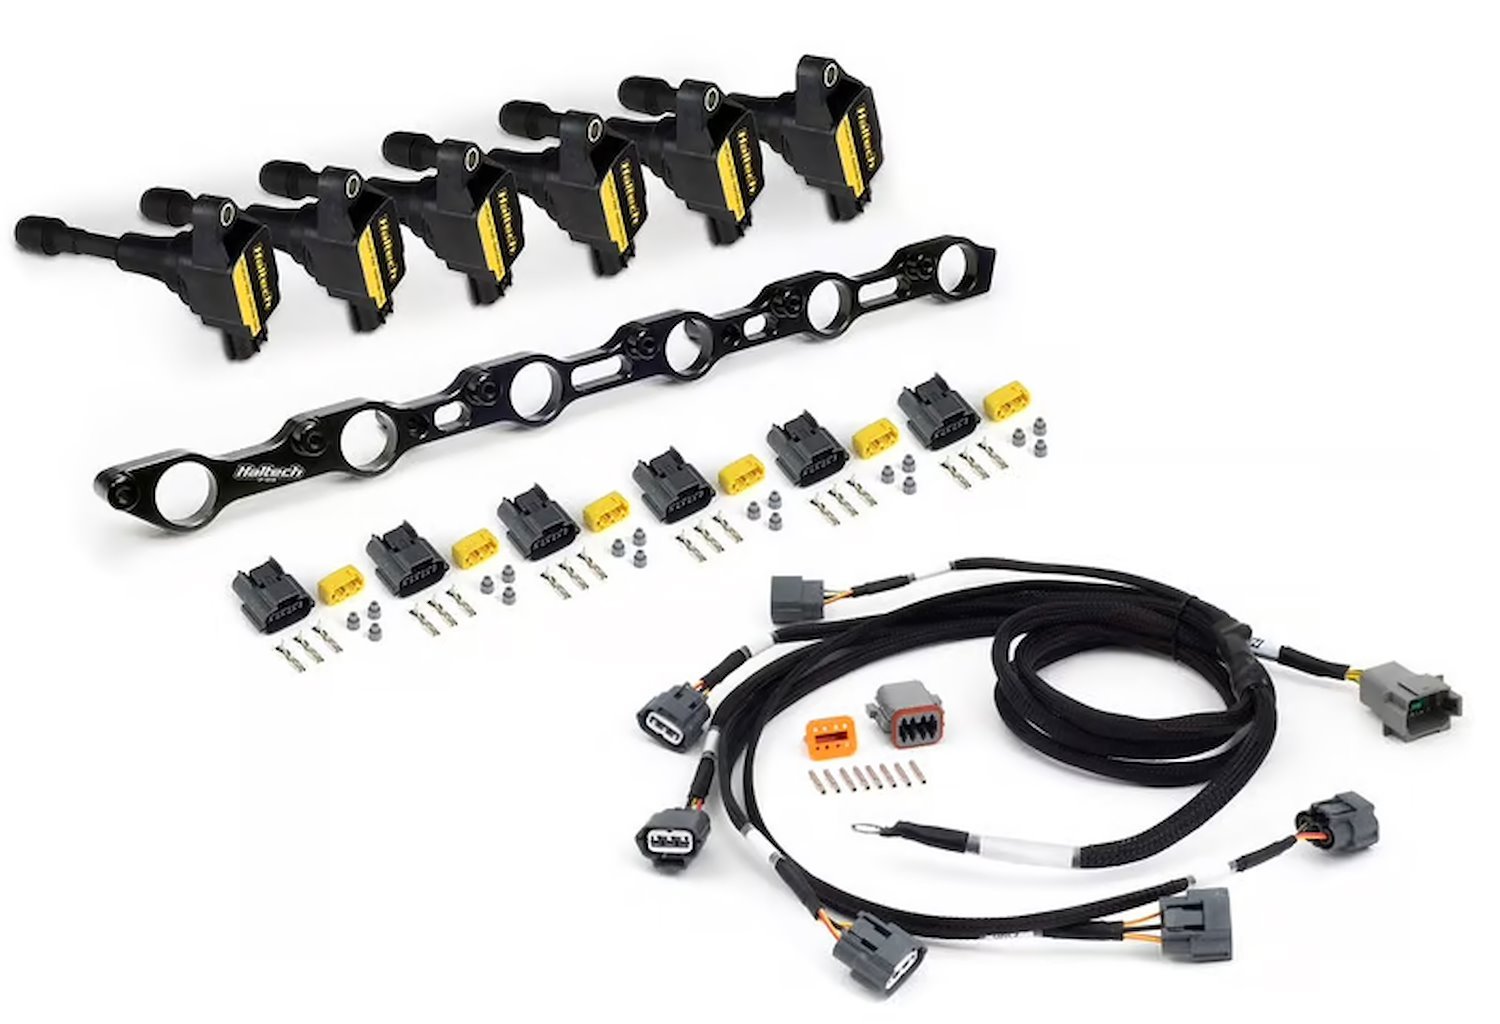 HT-120201 R35 Coil Conversion Kit, For Toyota JZ